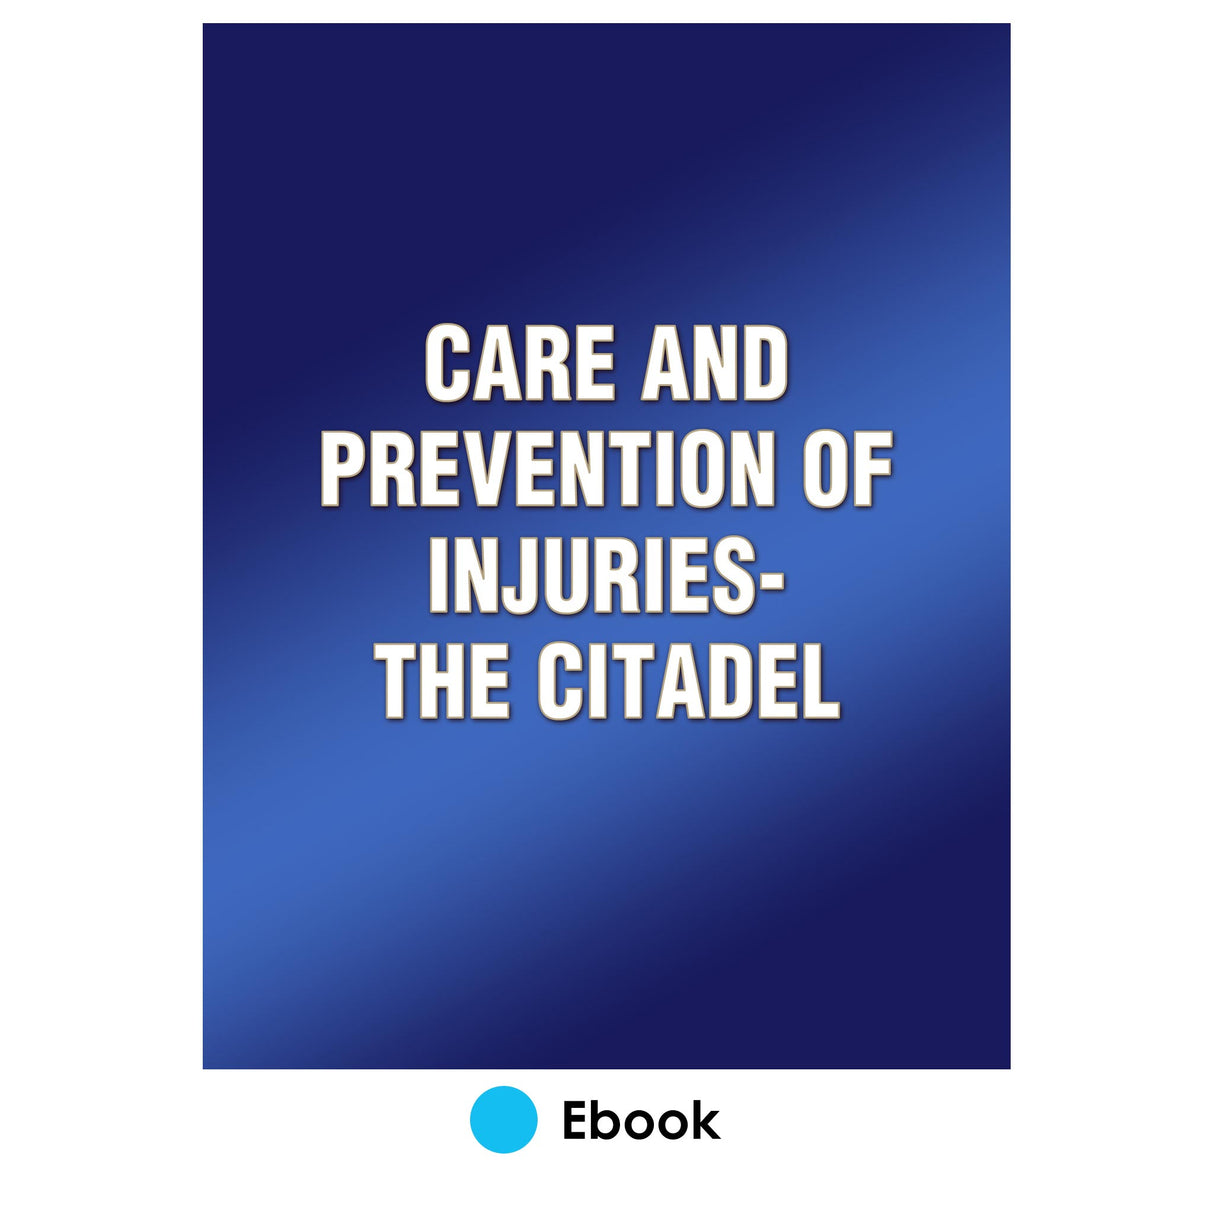 Care and Prevention of Injuries-The Citadel